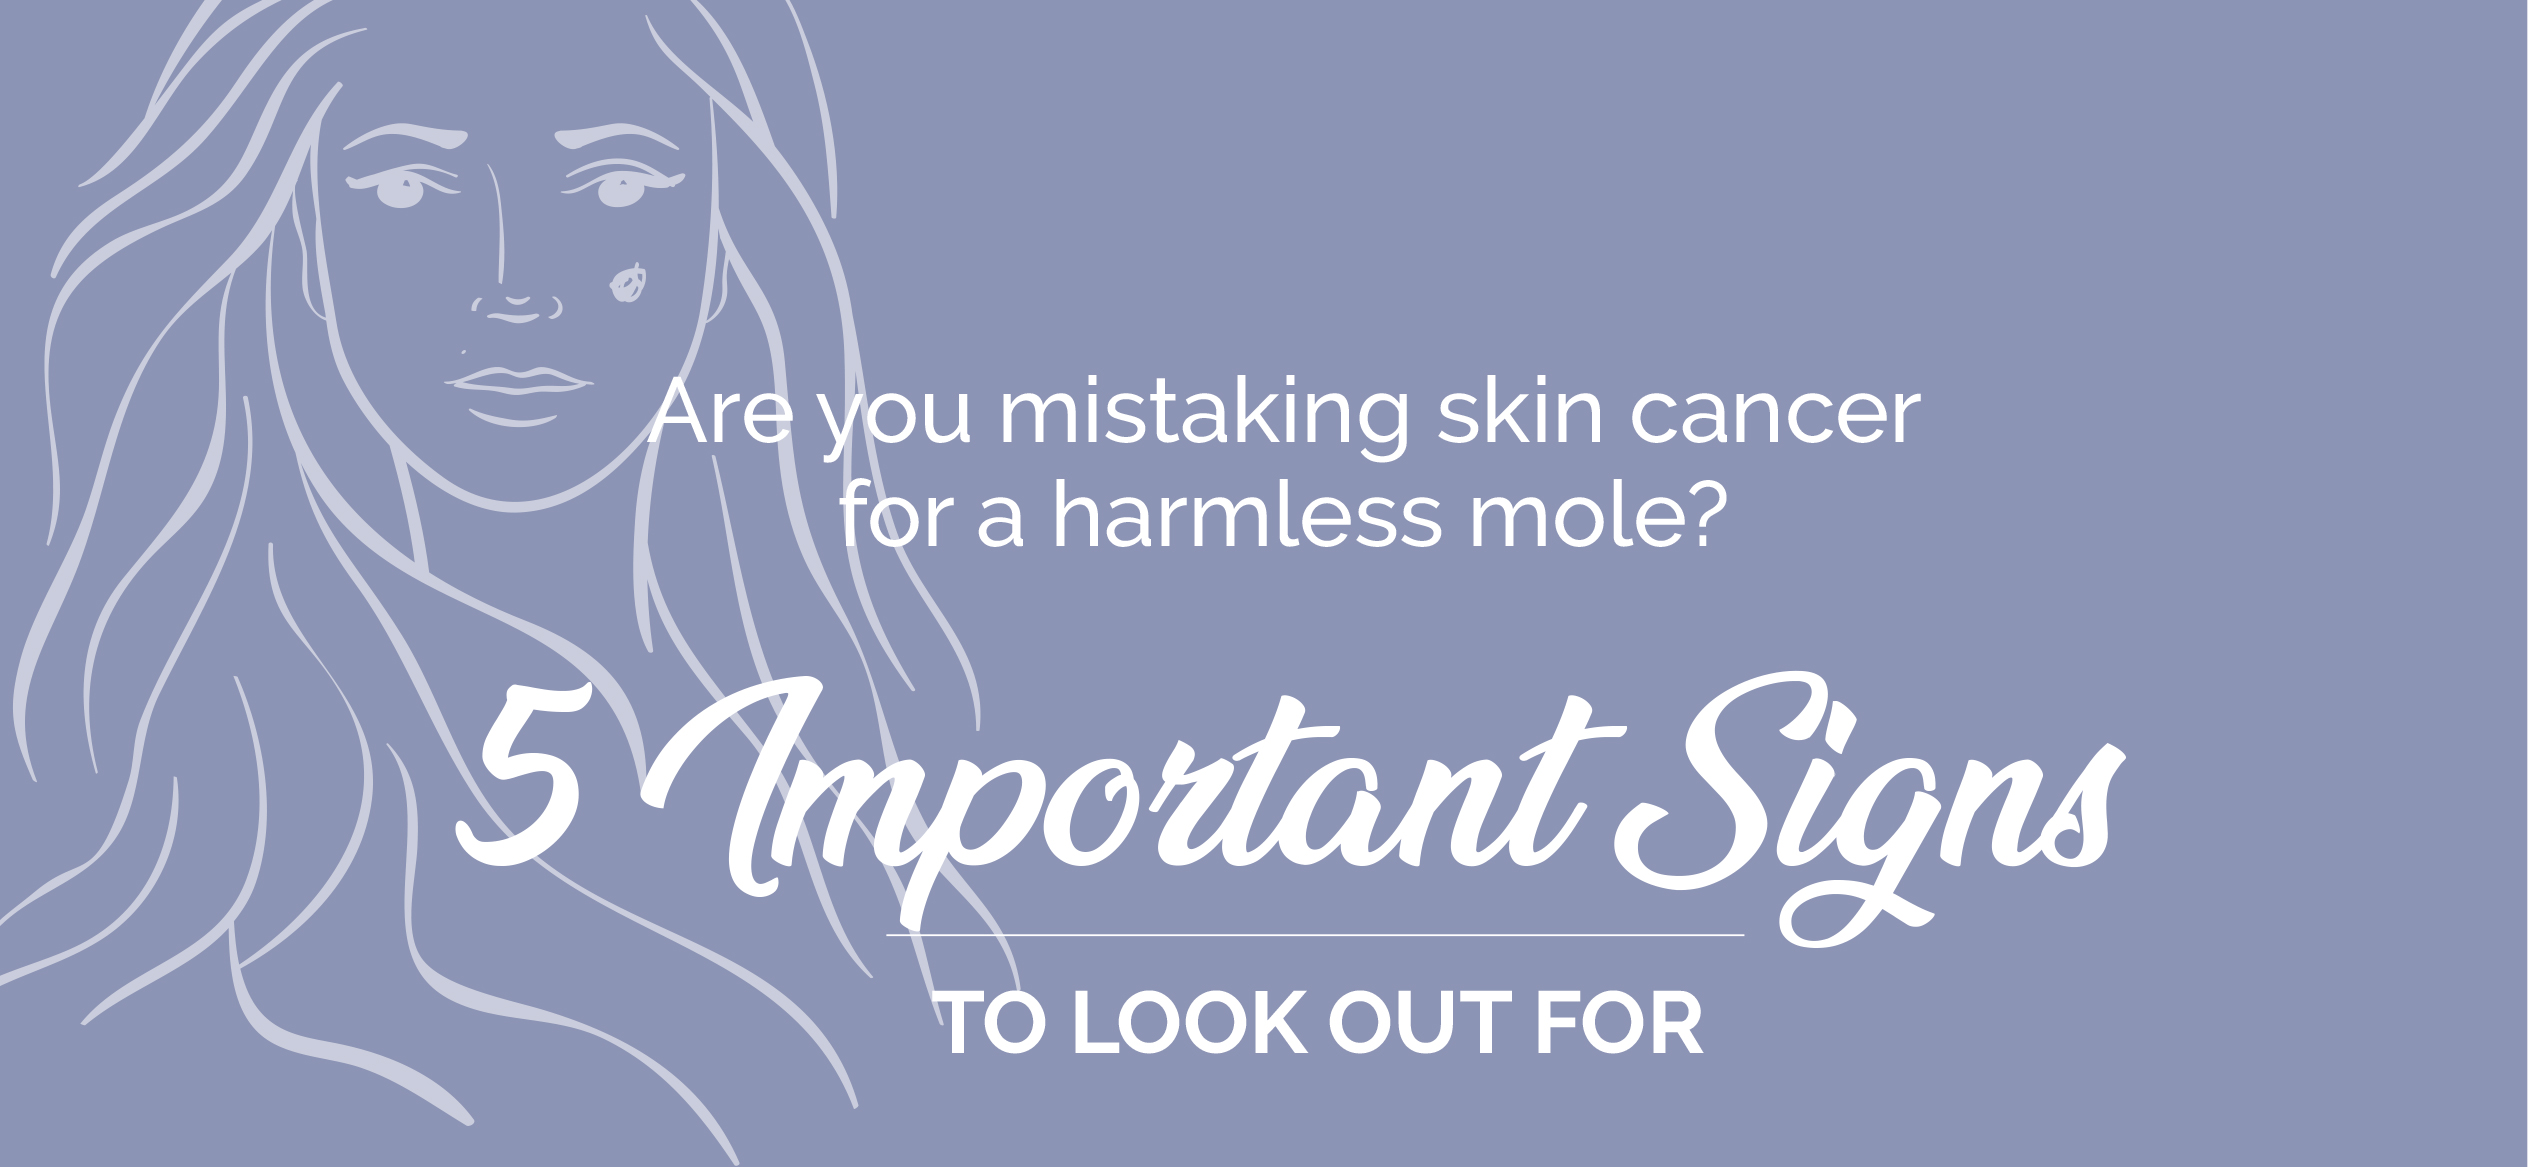 Are you mistaking skin cancer for a harmless mole?